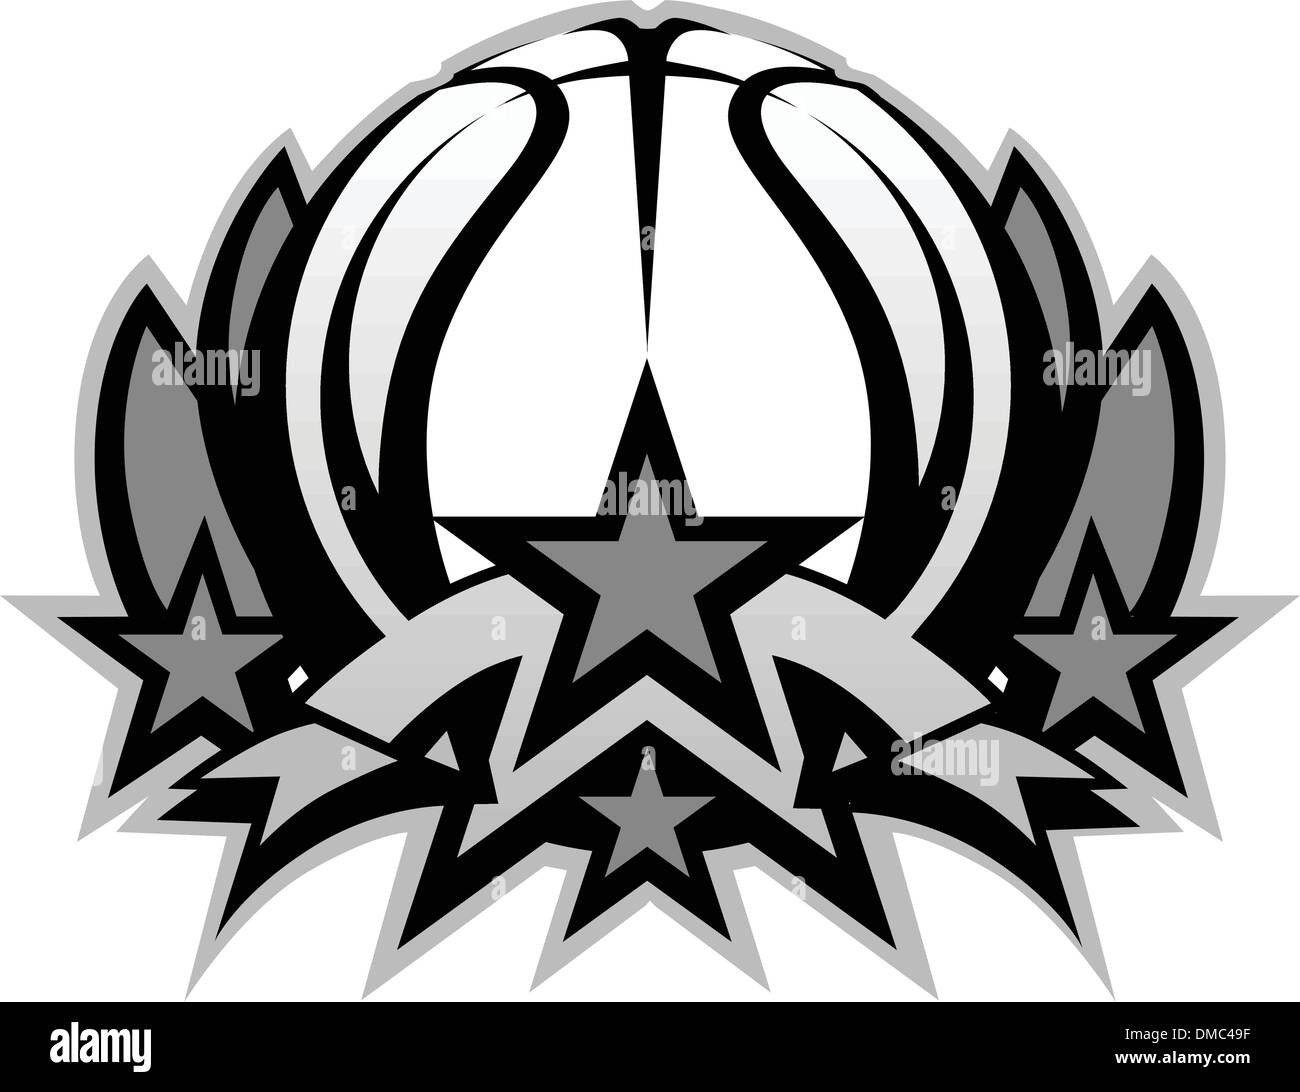 Basketball Ball Vector Graphic Template with Stars Stock Vector